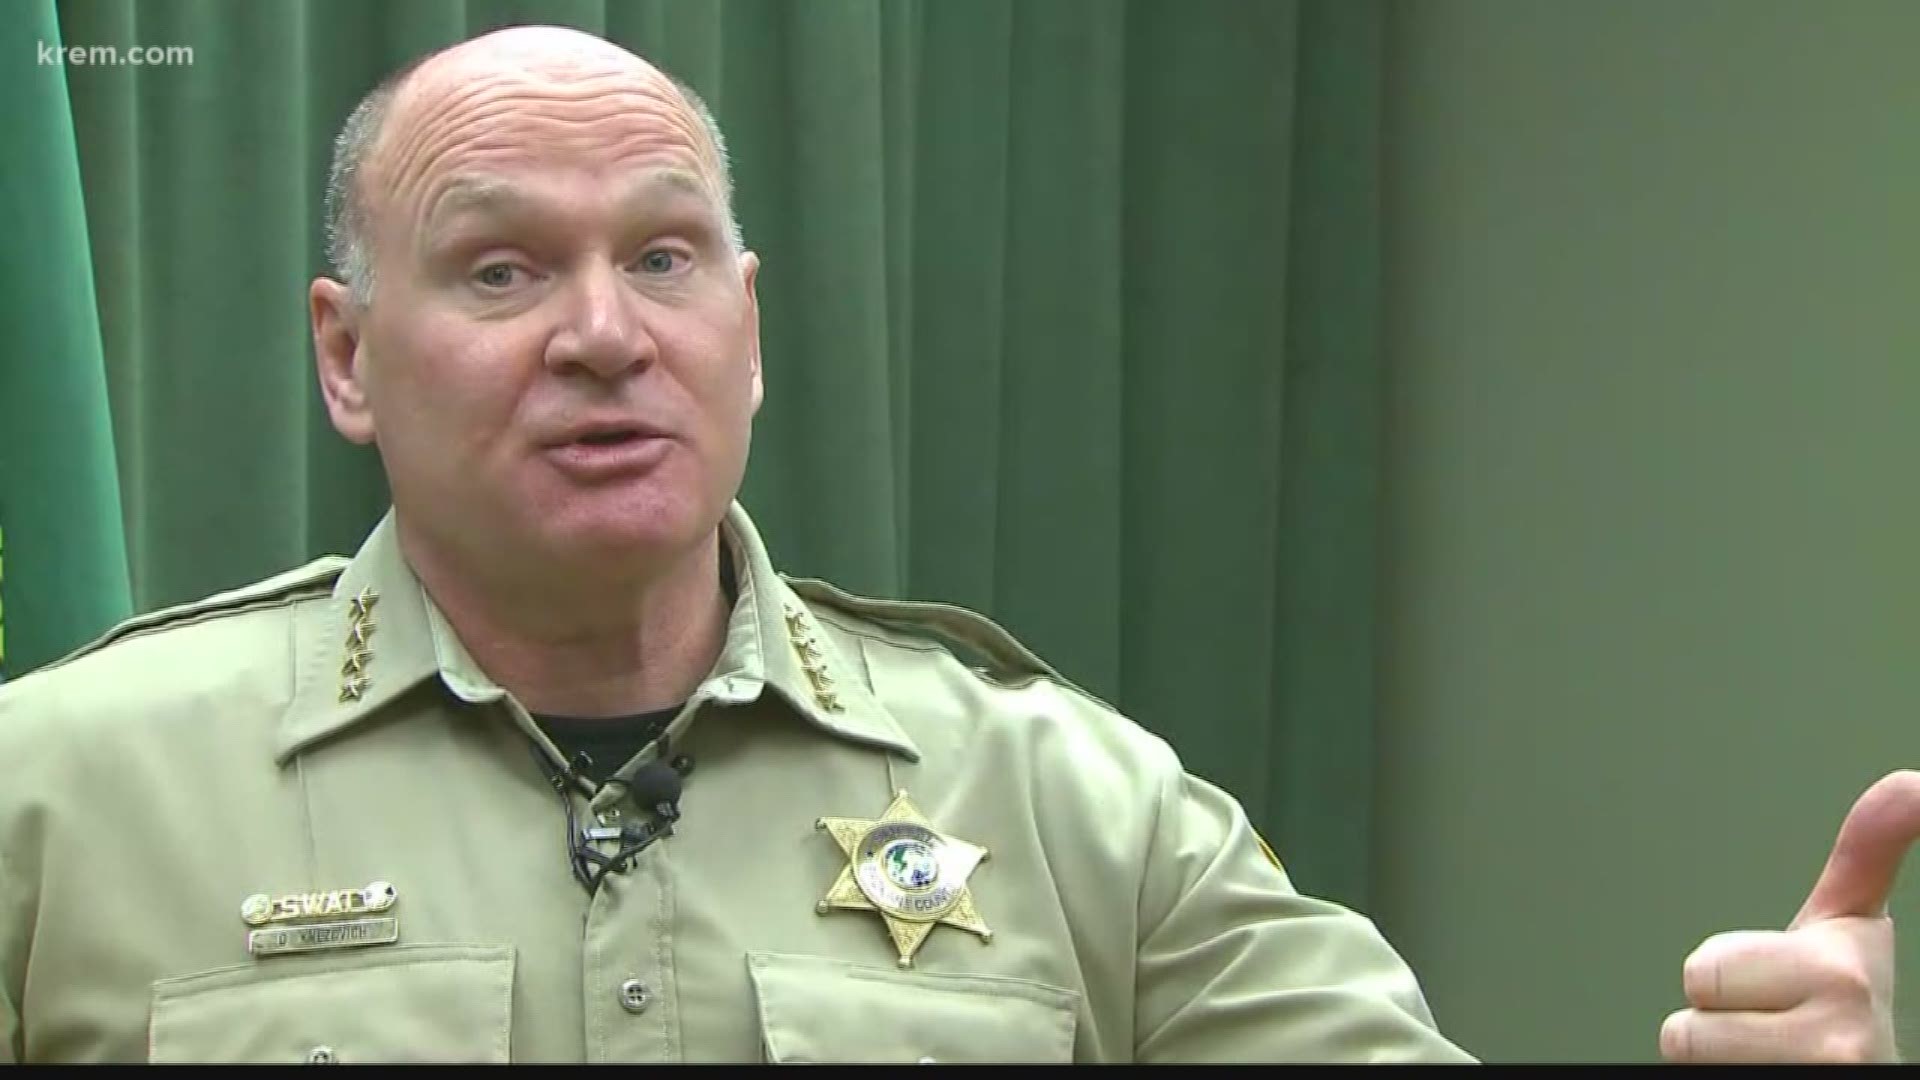 Spokane County Sheriff Ozzie Knezovich said he believes I-1639, which raises the age requirement for having a semi-automatic rifle, is unconstitutional.